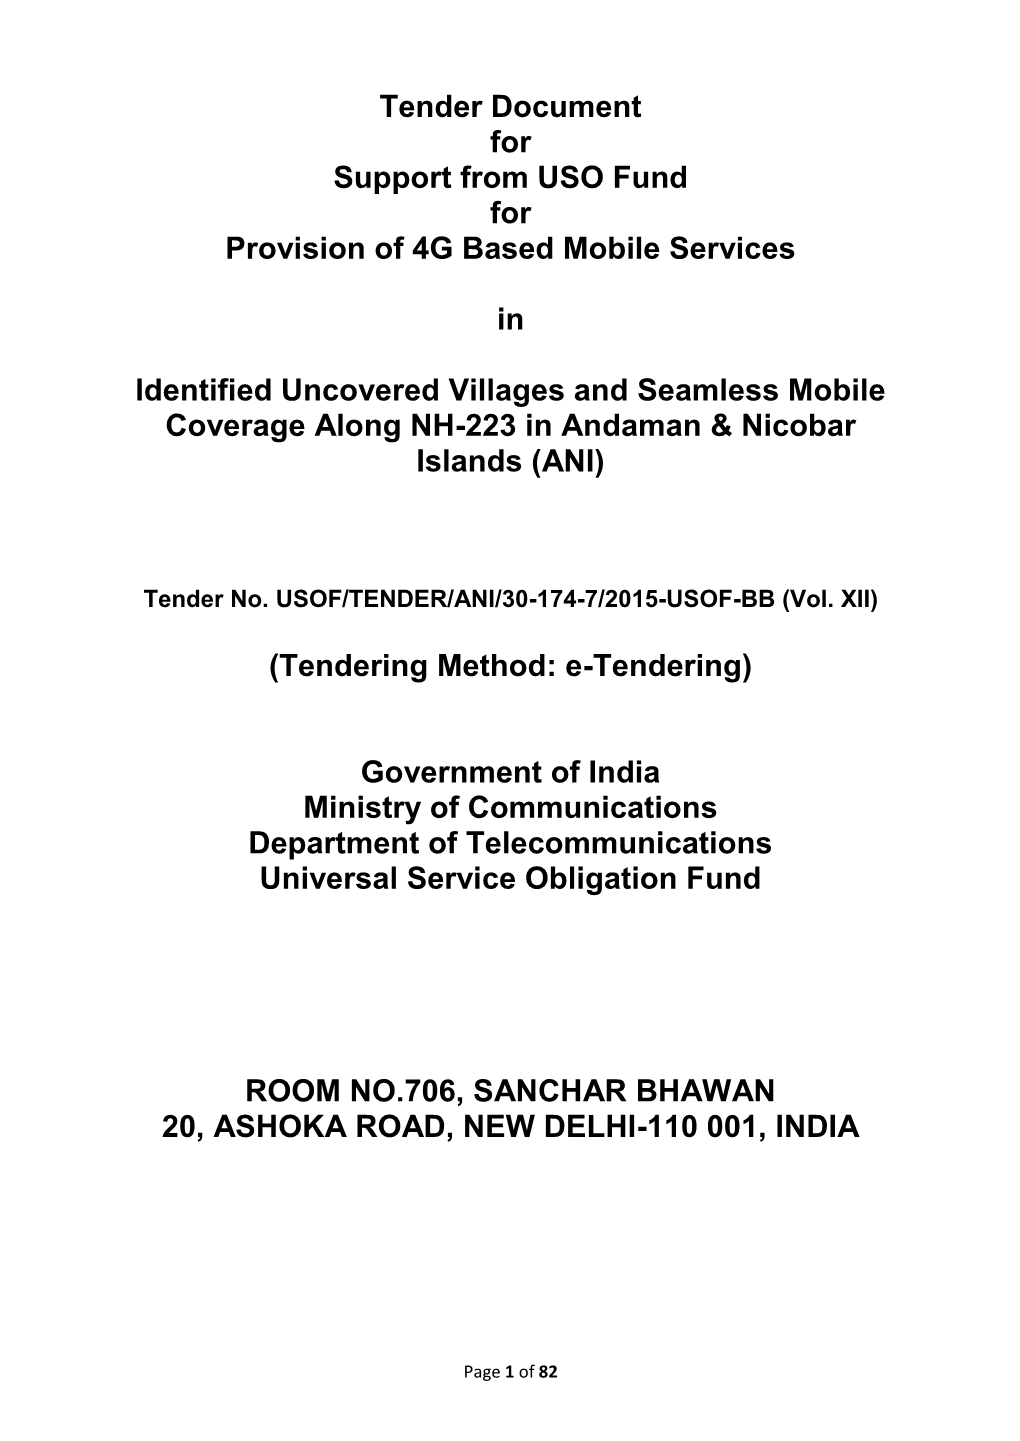 Tender Document for Support from USO Fund for Provision of 4G Based Mobile Services